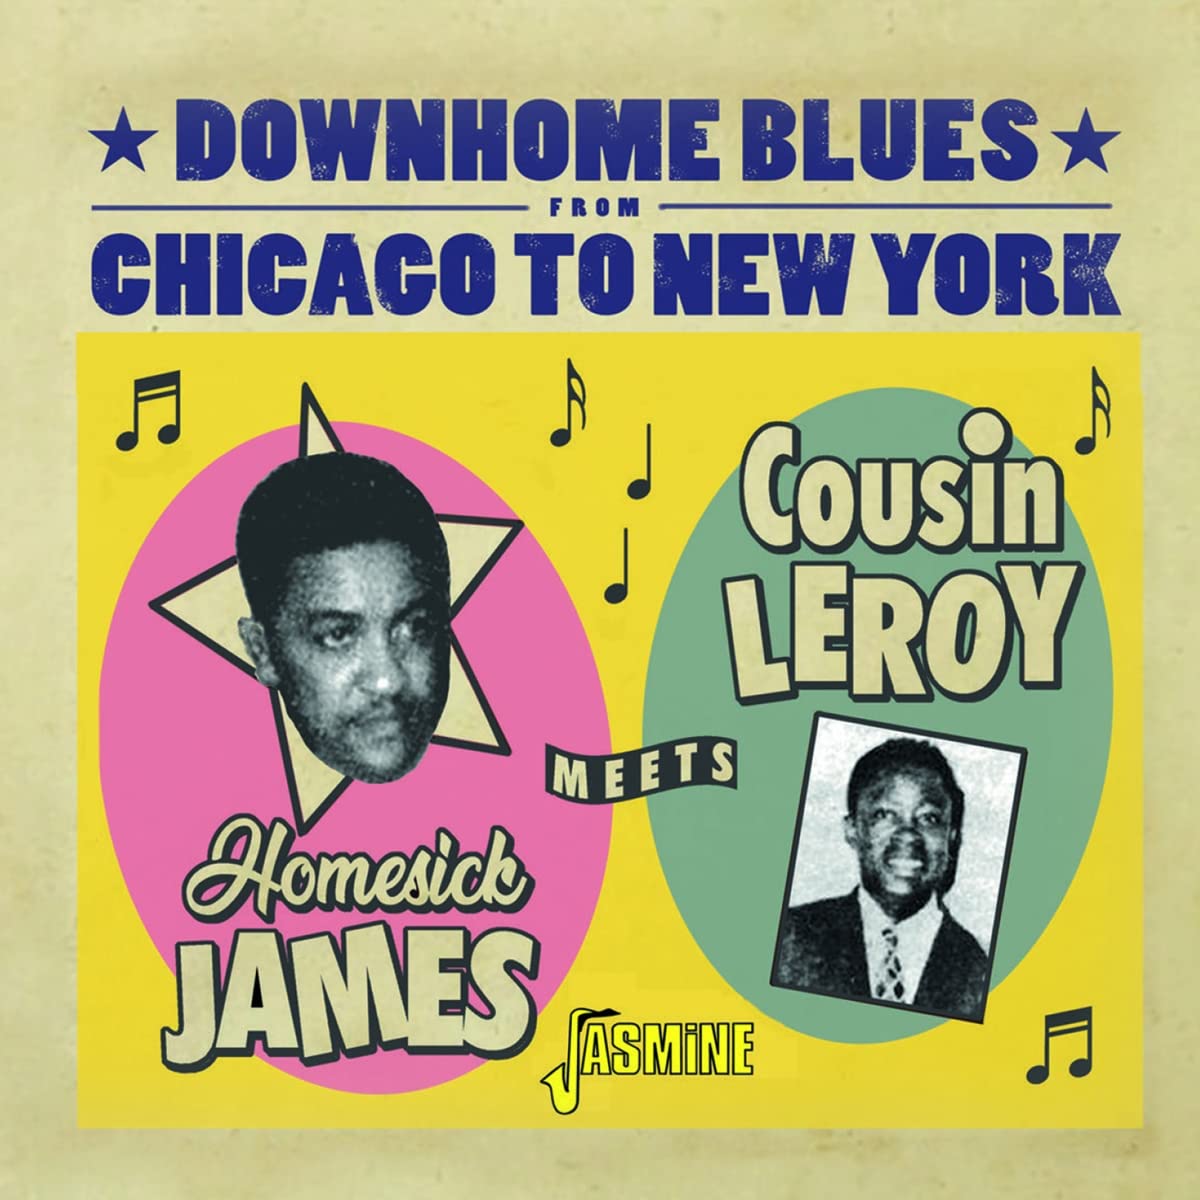 Homesick James Meets Cousin Leroy - Downhome Blues From Chicago To New York